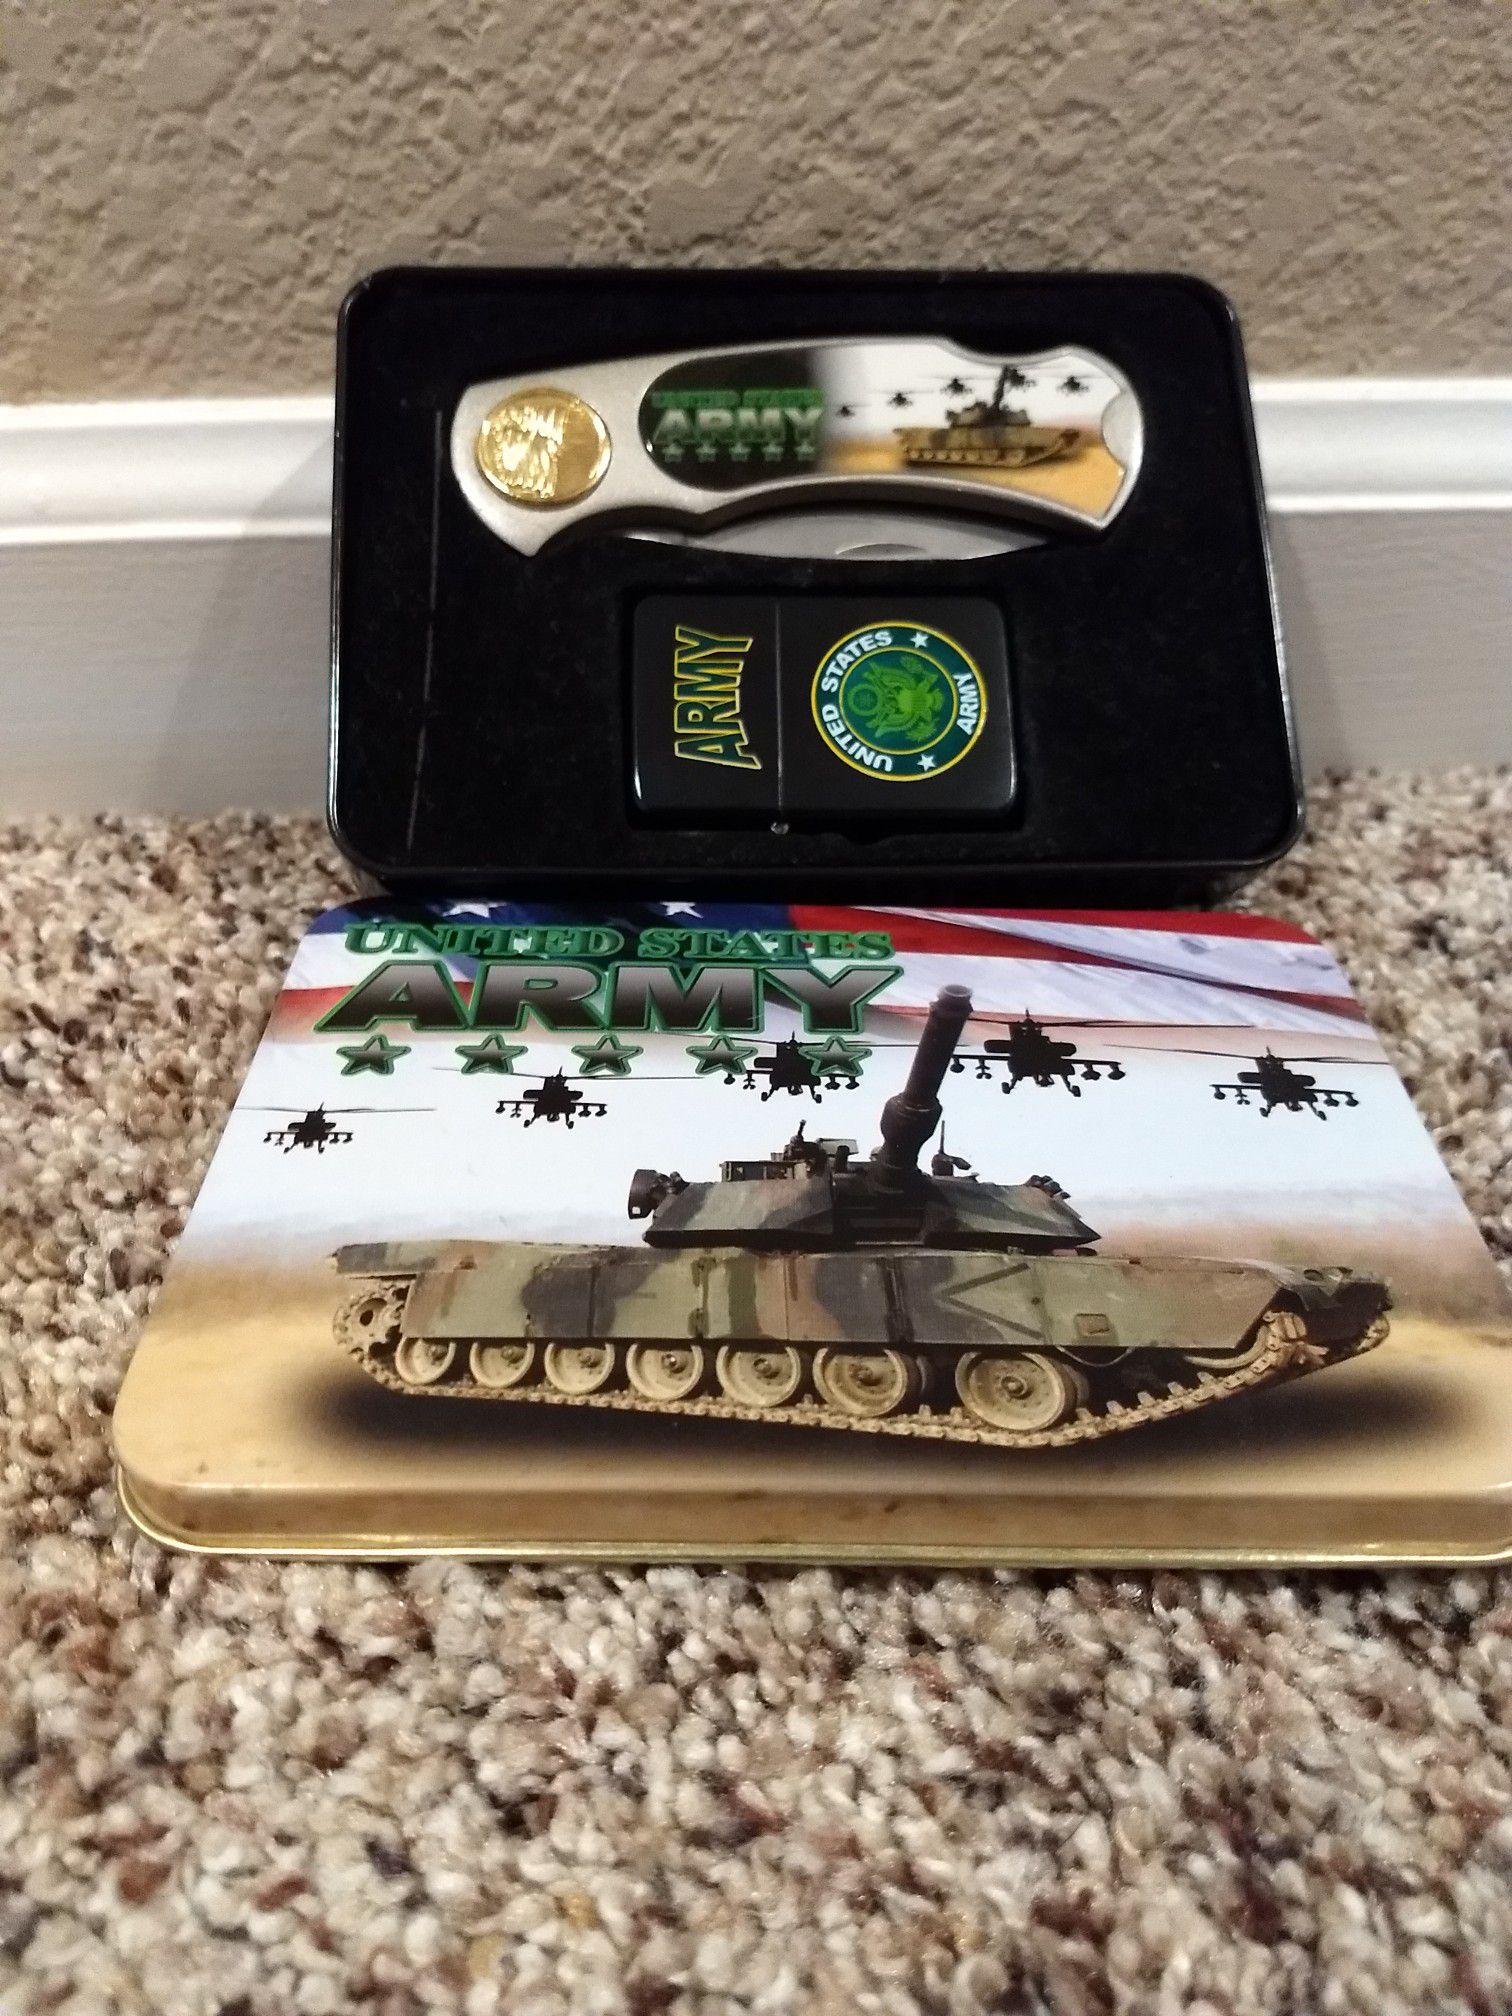 Army knife/Zippo collectors set